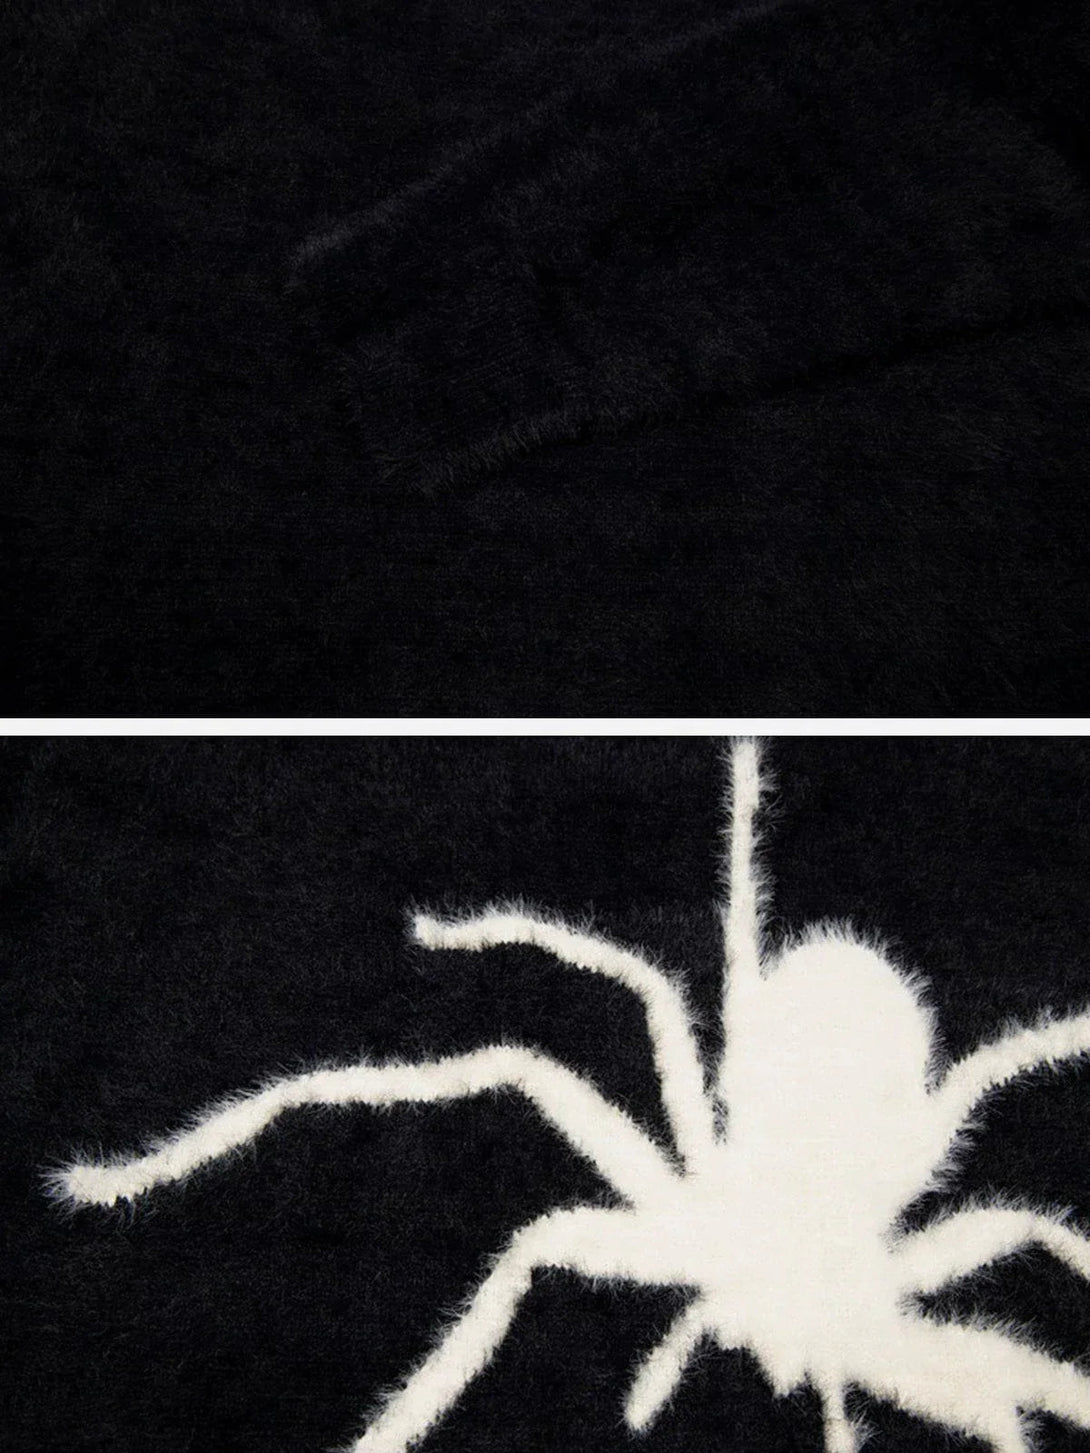 Majesda® - Spider Knit Mohair Sweater outfit ideas streetwear fashion